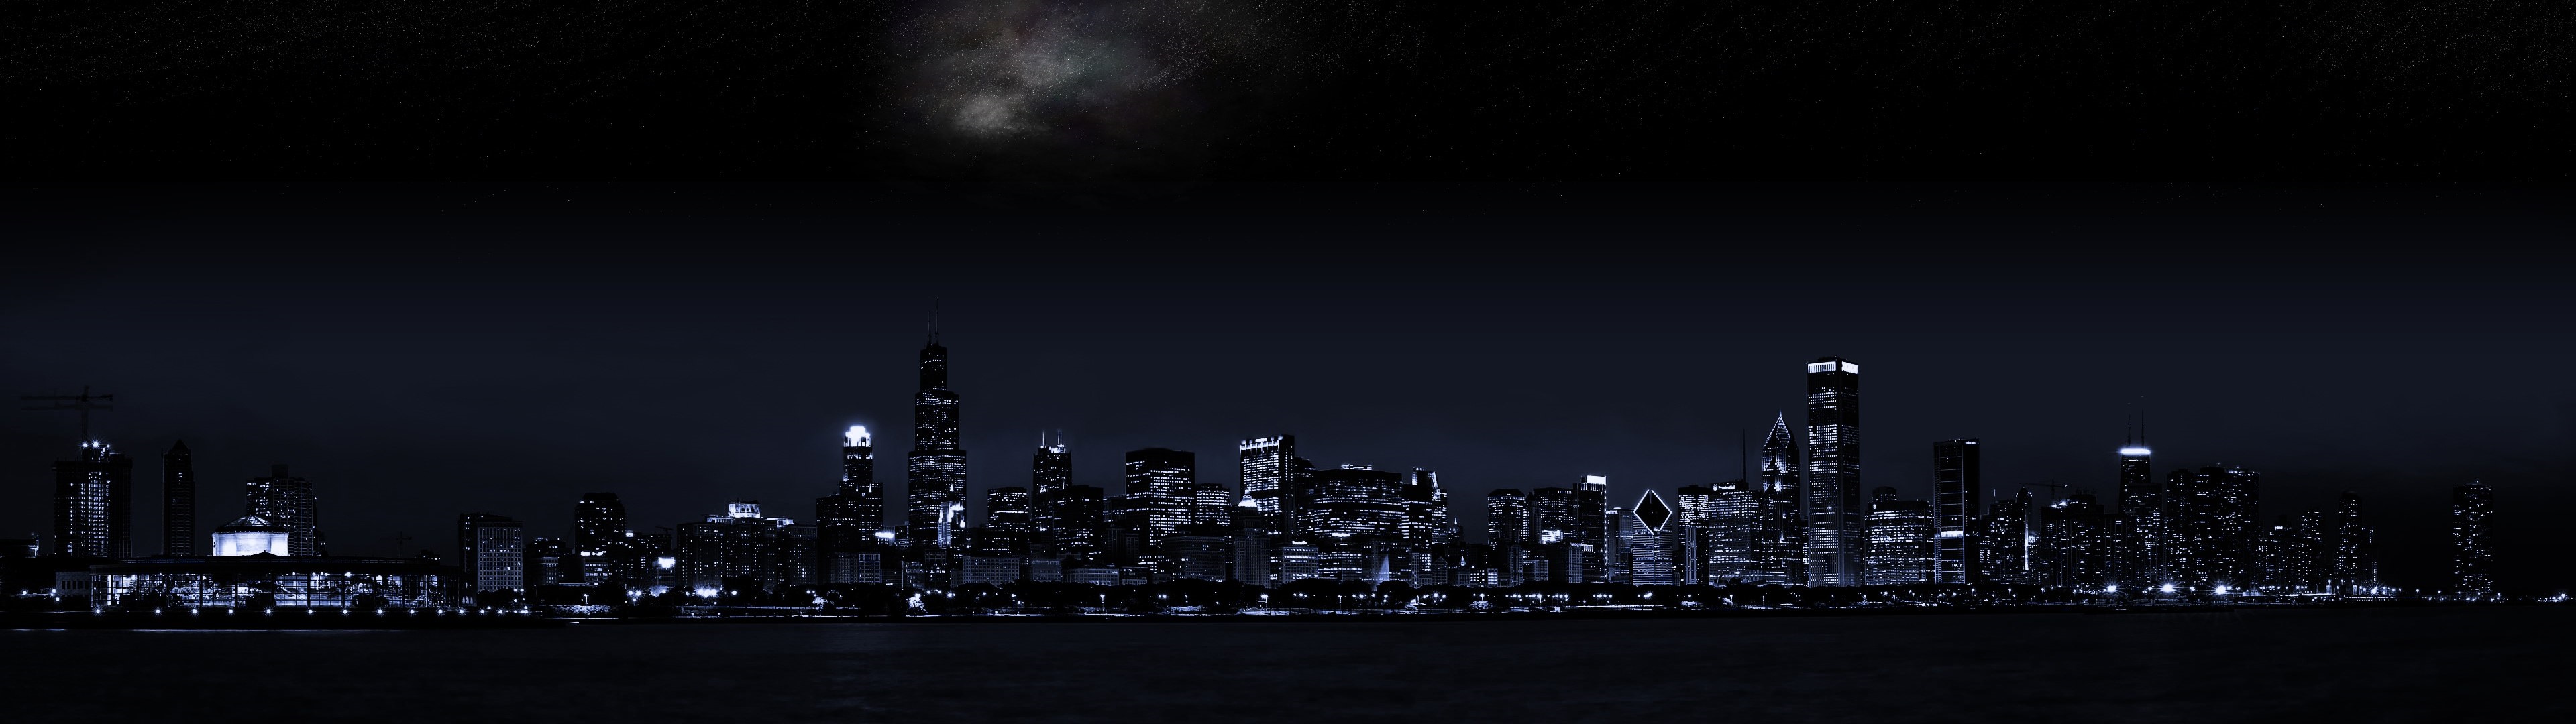 City Wide Screen Wide Image Simple Background 3840x1080